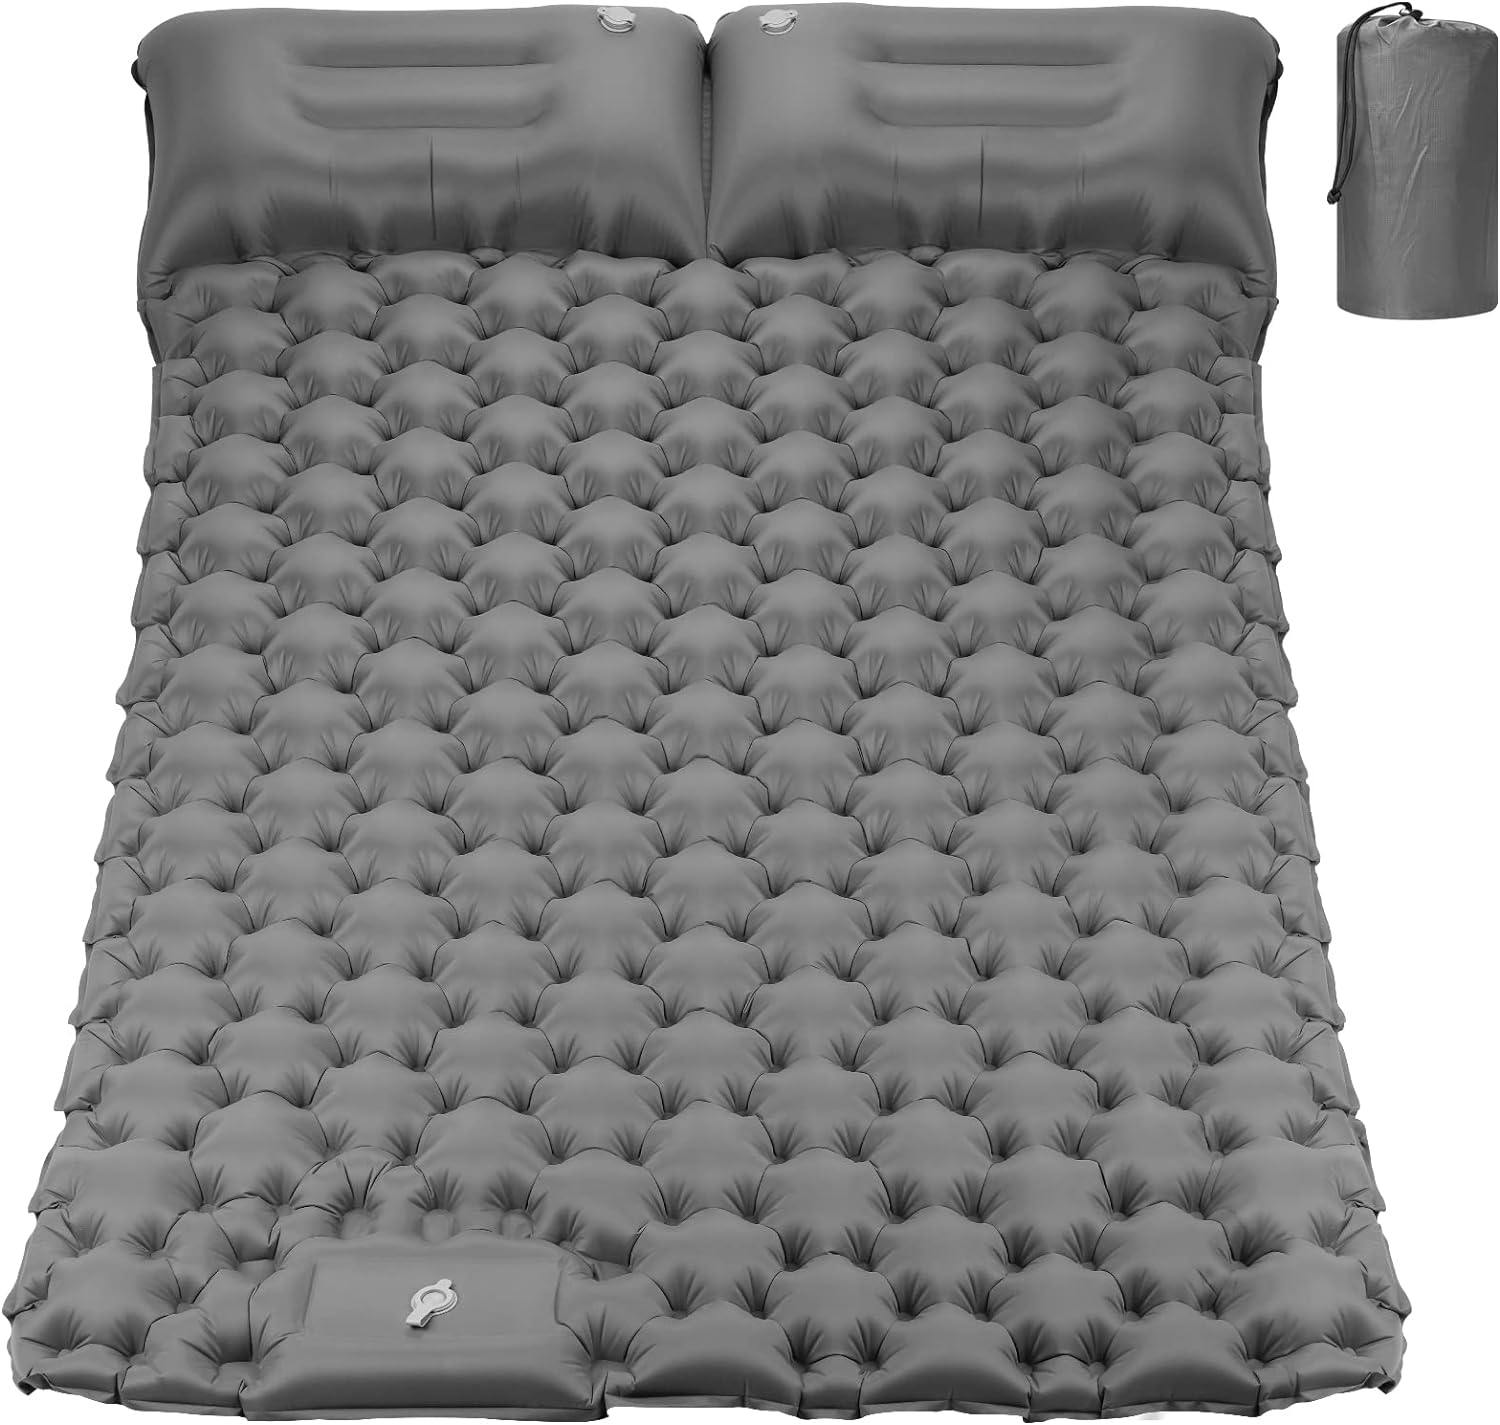 Sleeping Pad for Camping,Camping Air Mattress for 2 Person 